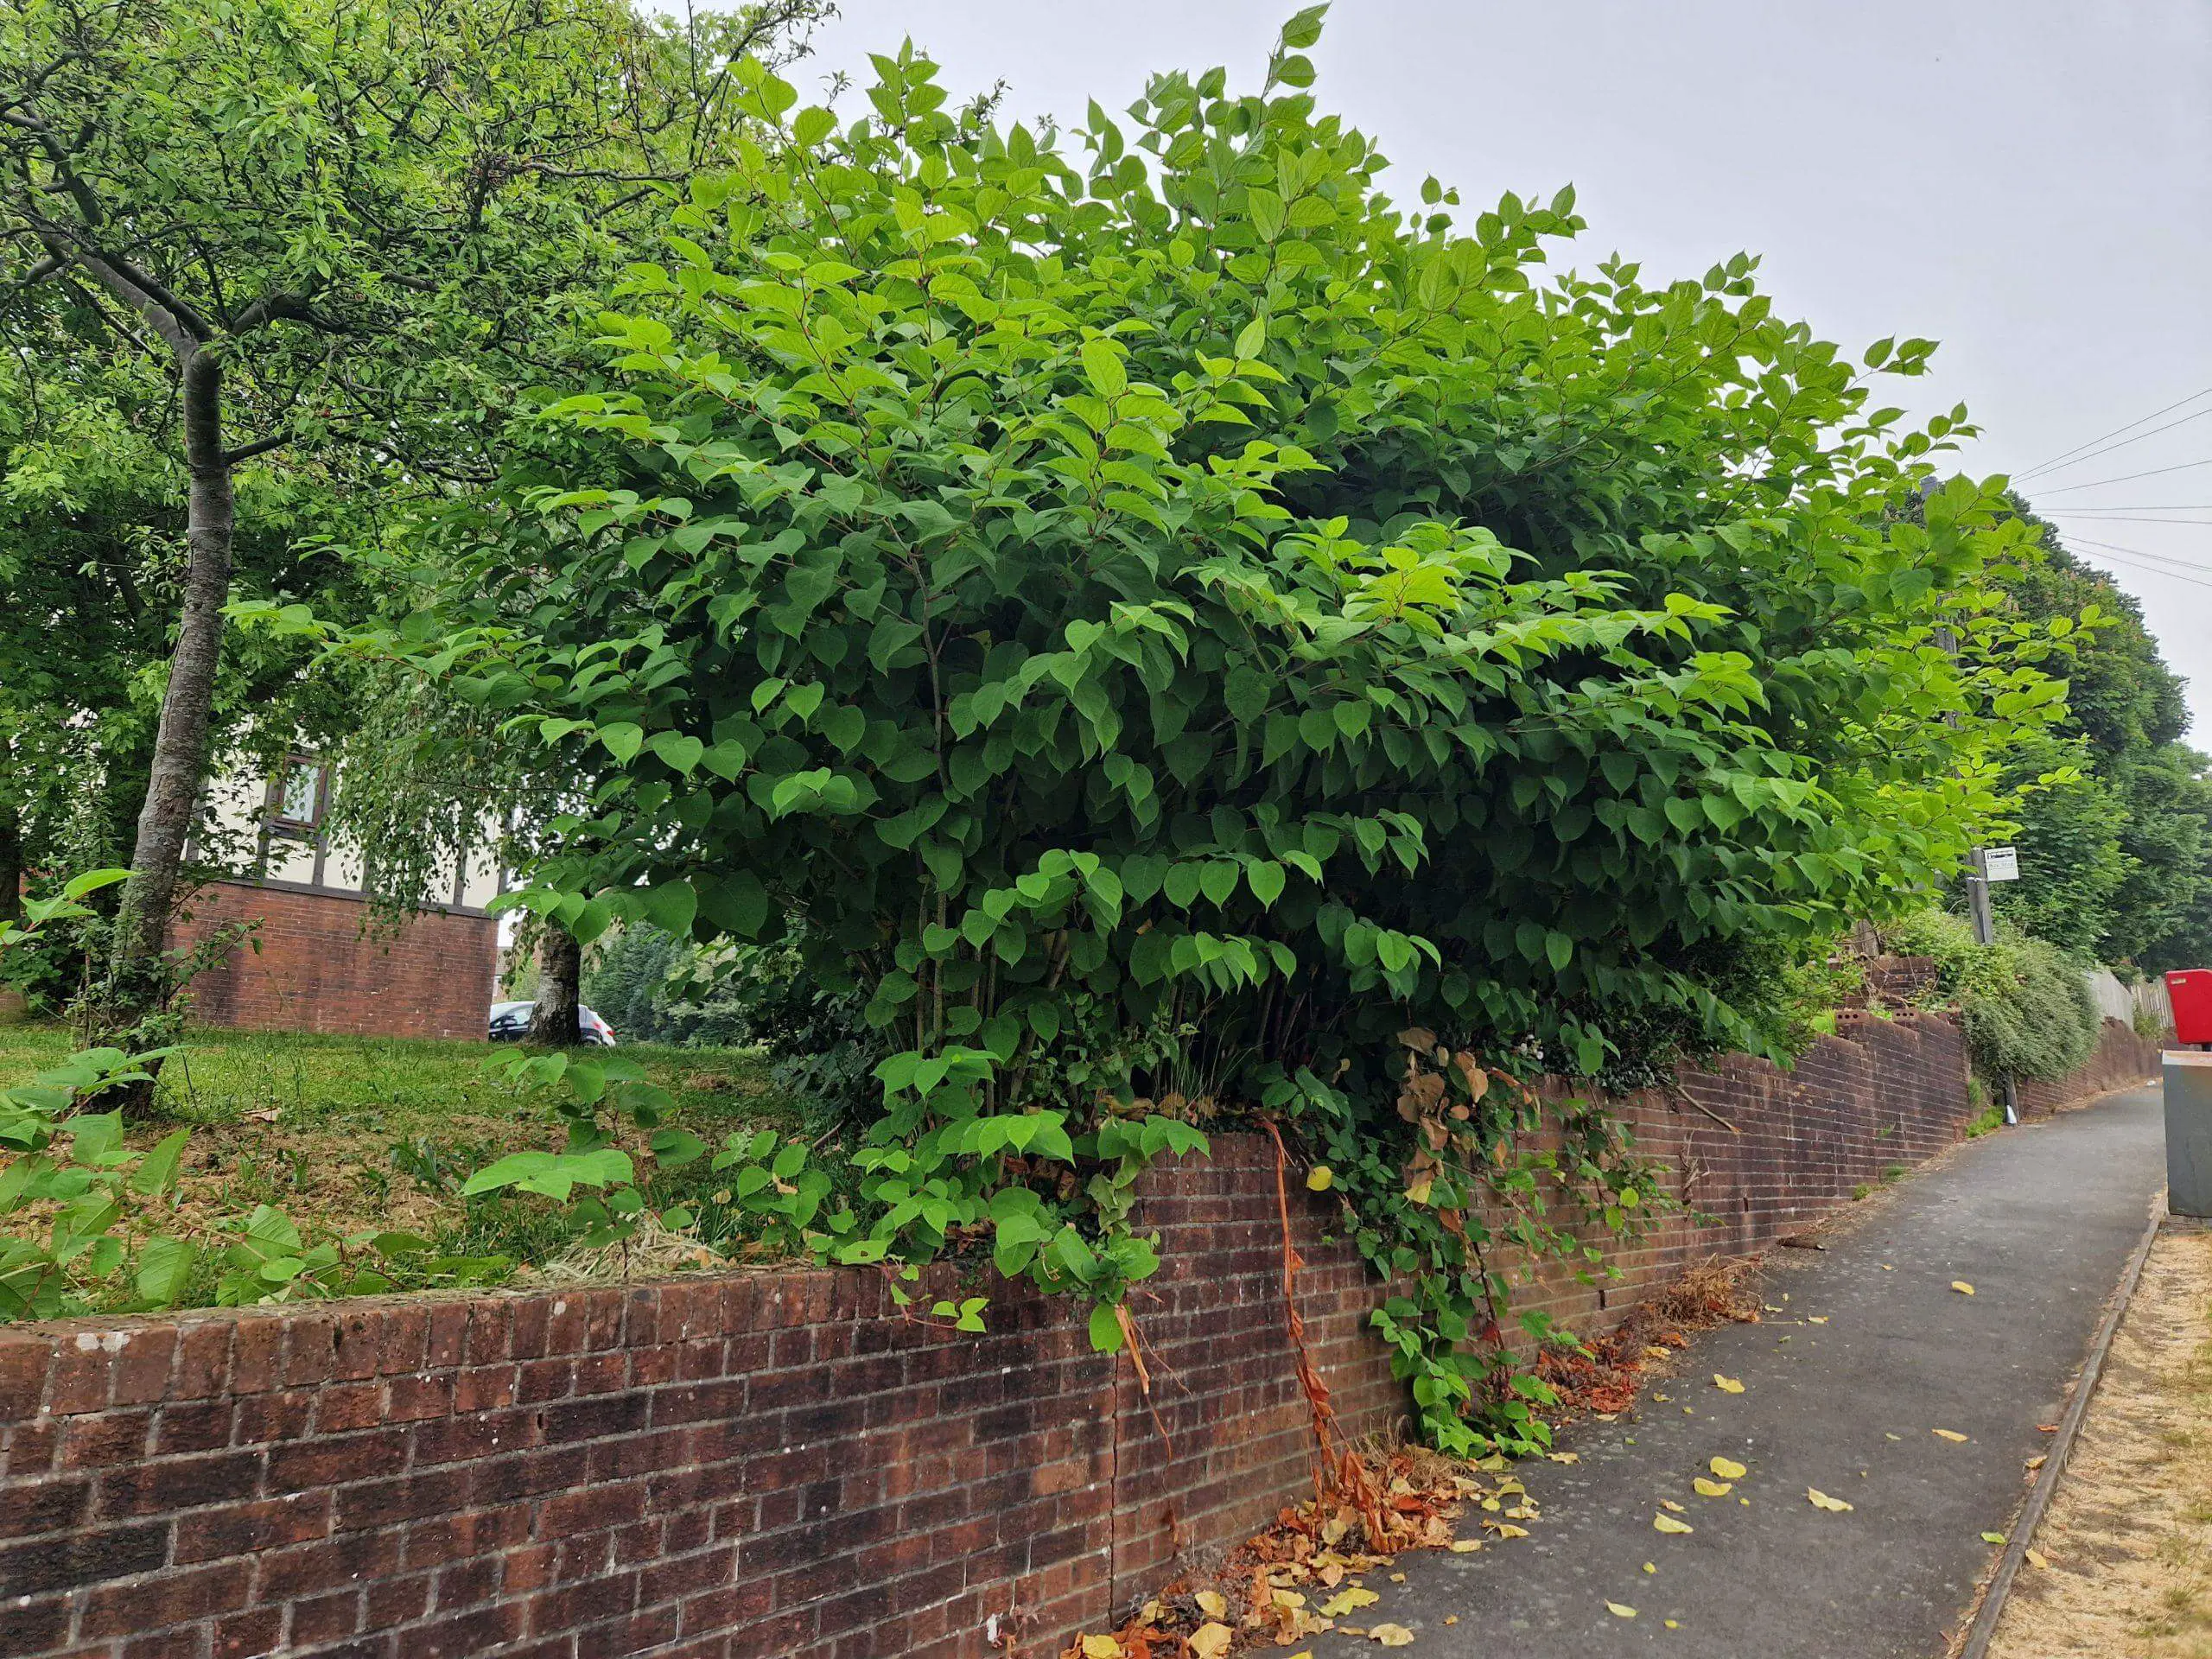 The cost of Japanese knotweed removal and control